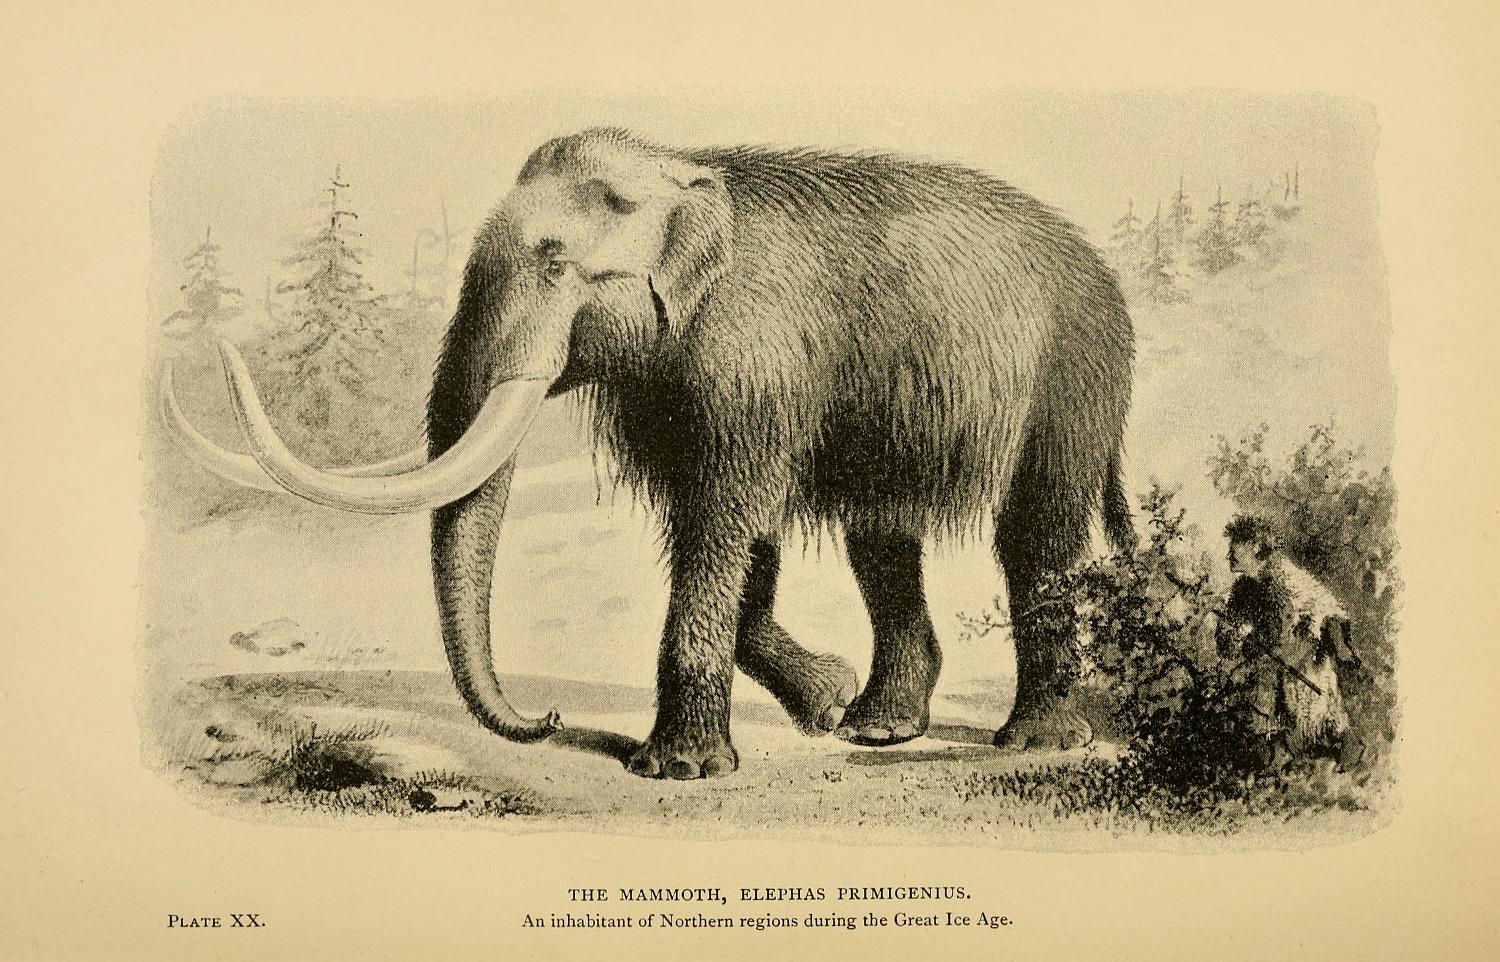 the elephant is standing in a field